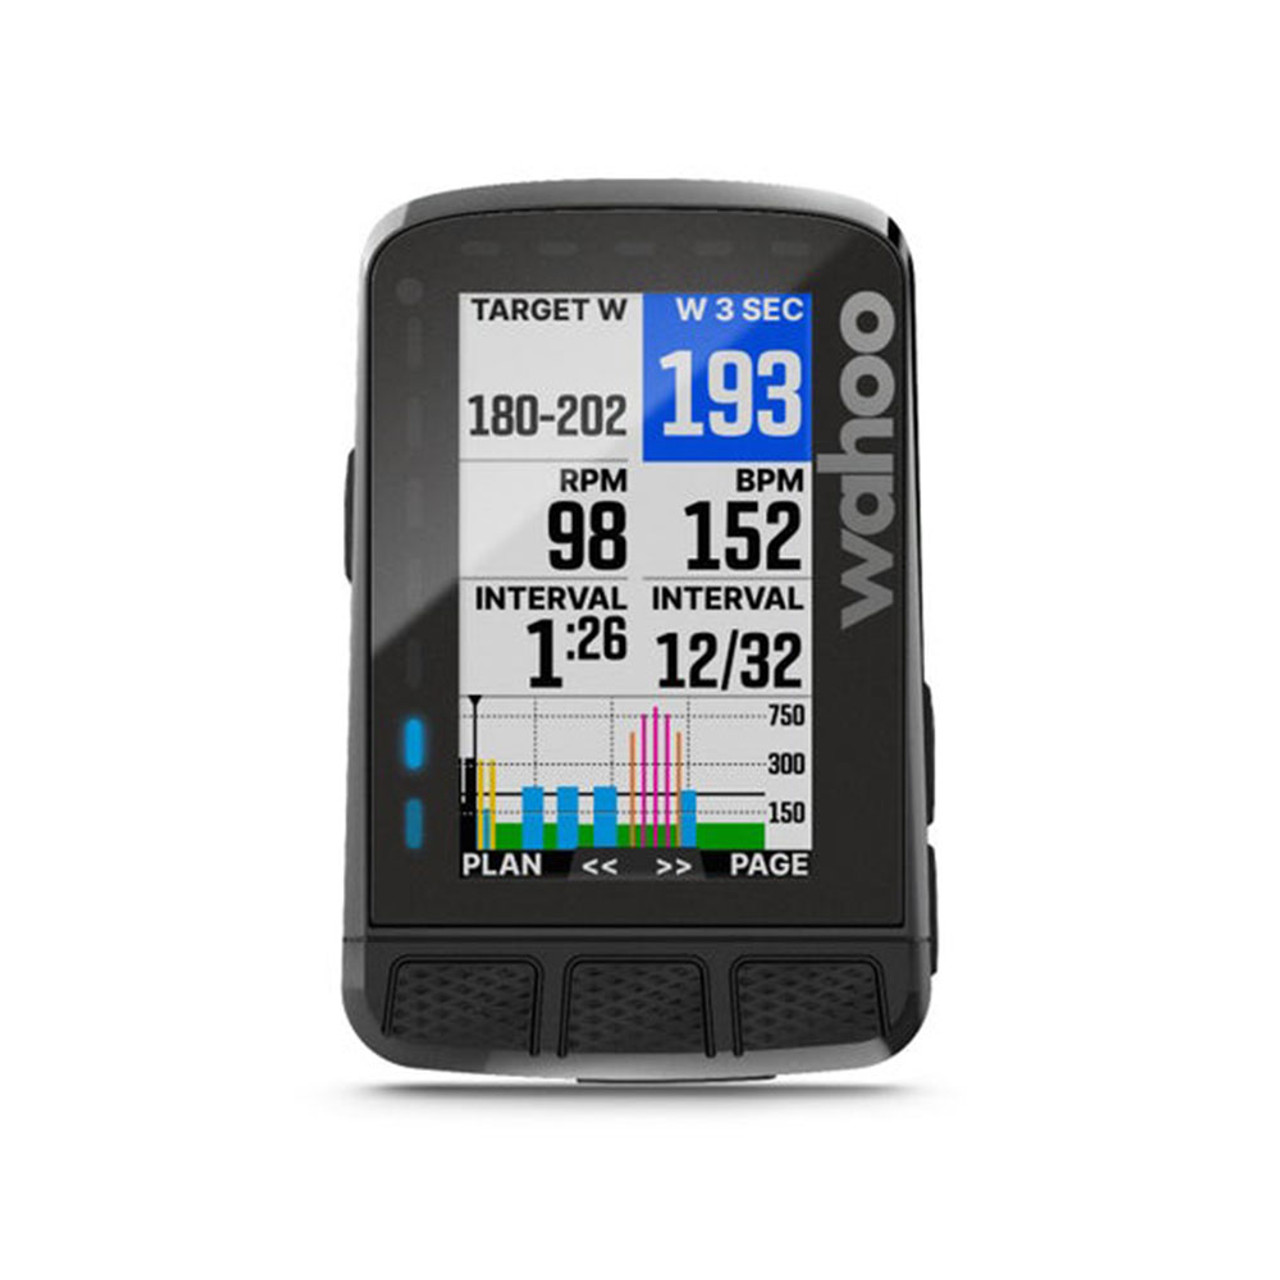 New Wahoo Elemnt Roam bike computer gets more accurate GPS, more memory and  more colours - here's our first look